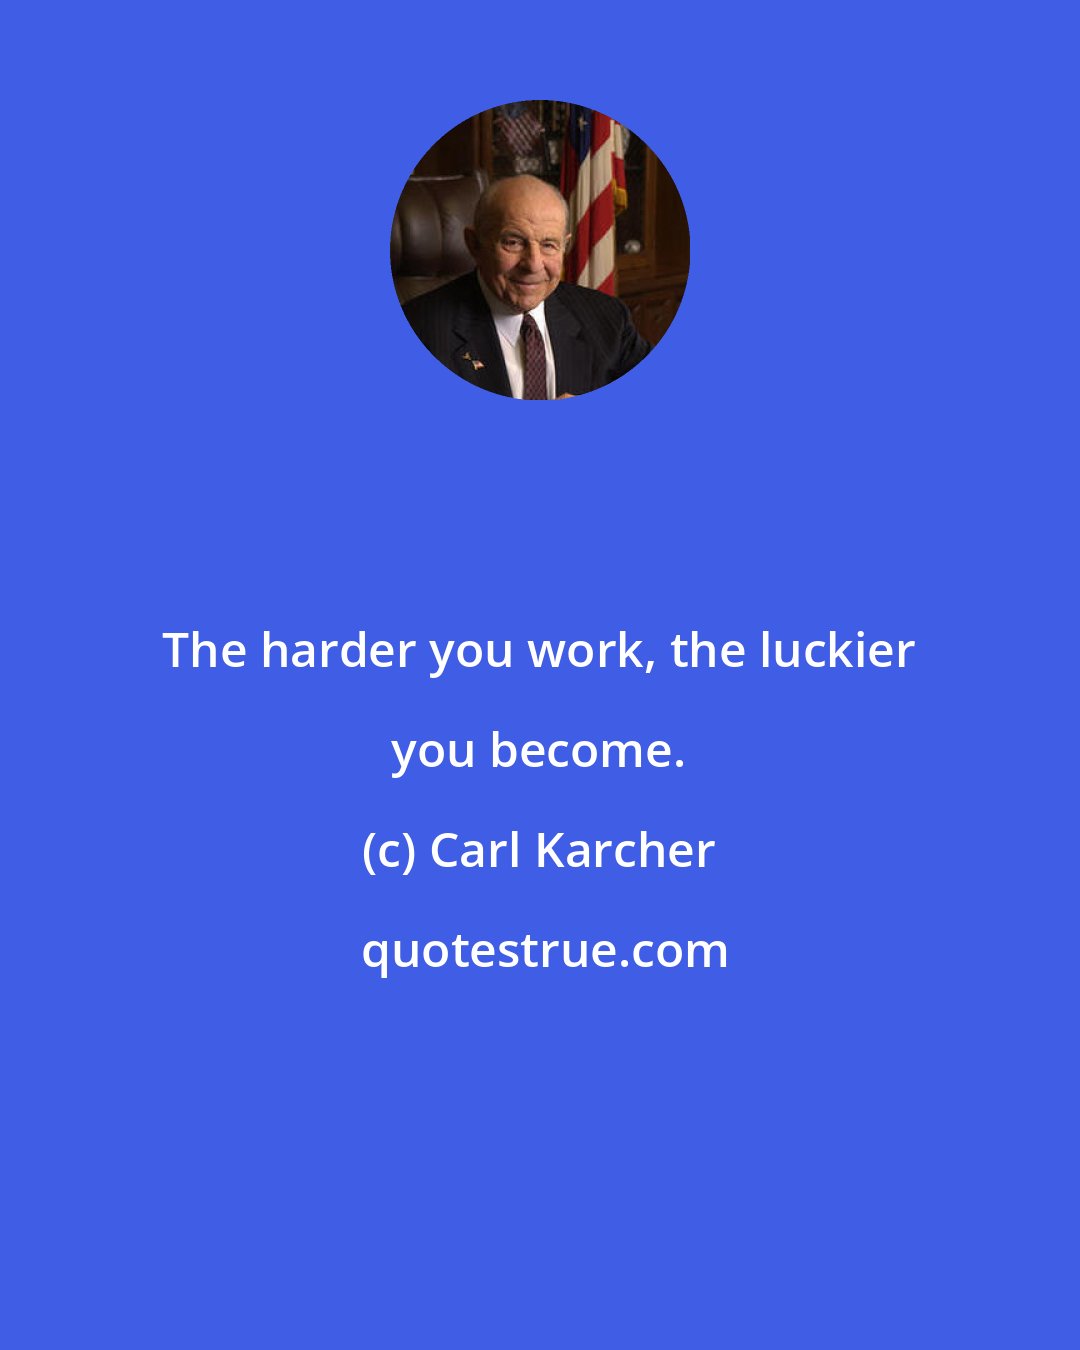 Carl Karcher: The harder you work, the luckier you become.